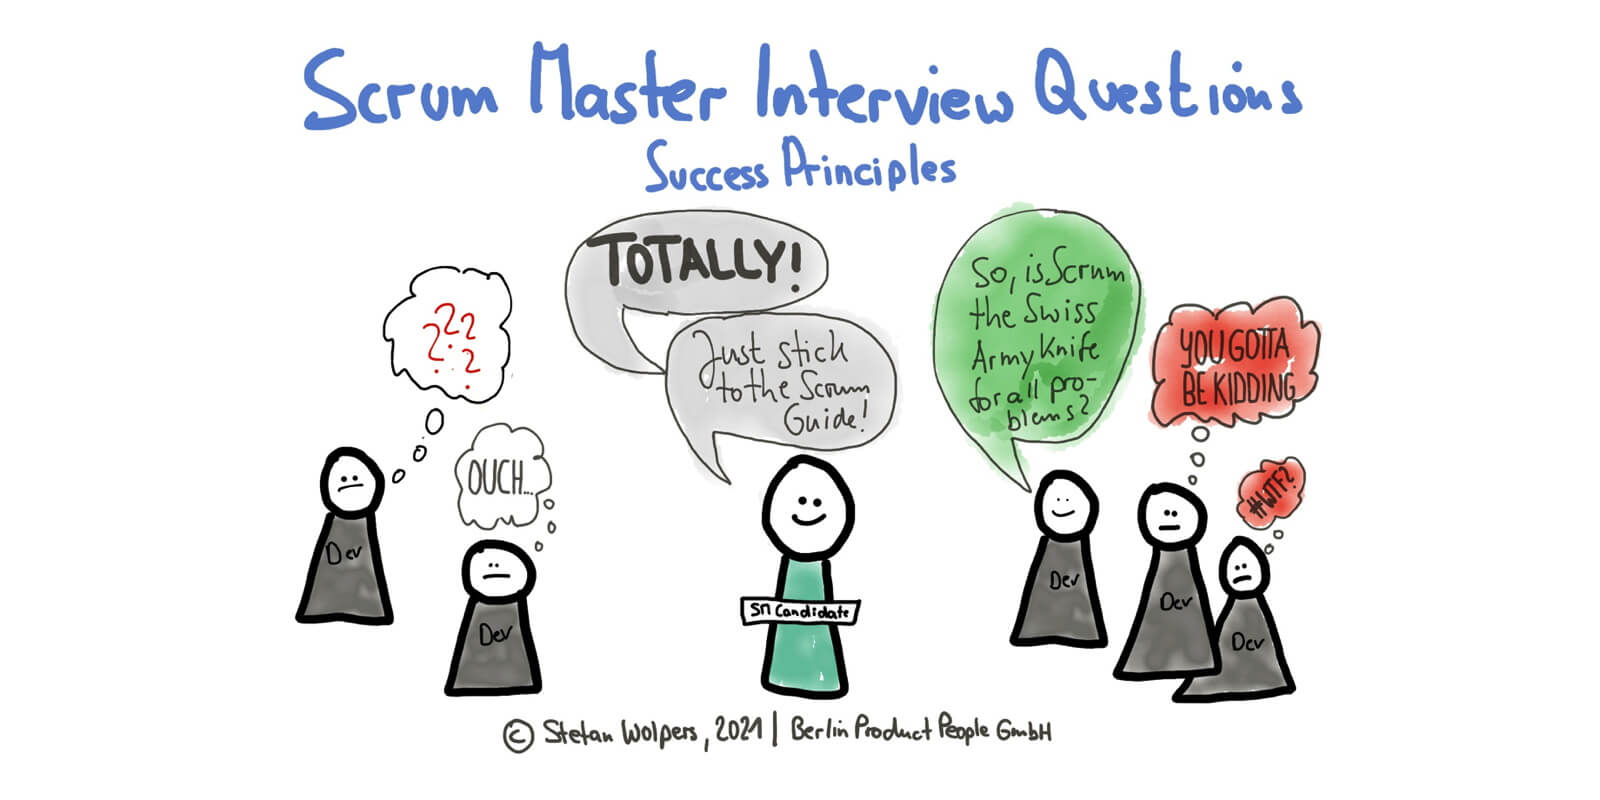 51 Scrum Master Interview Questions (5): Scrum Success Principles and Indicators — Berlin Product People GmbH